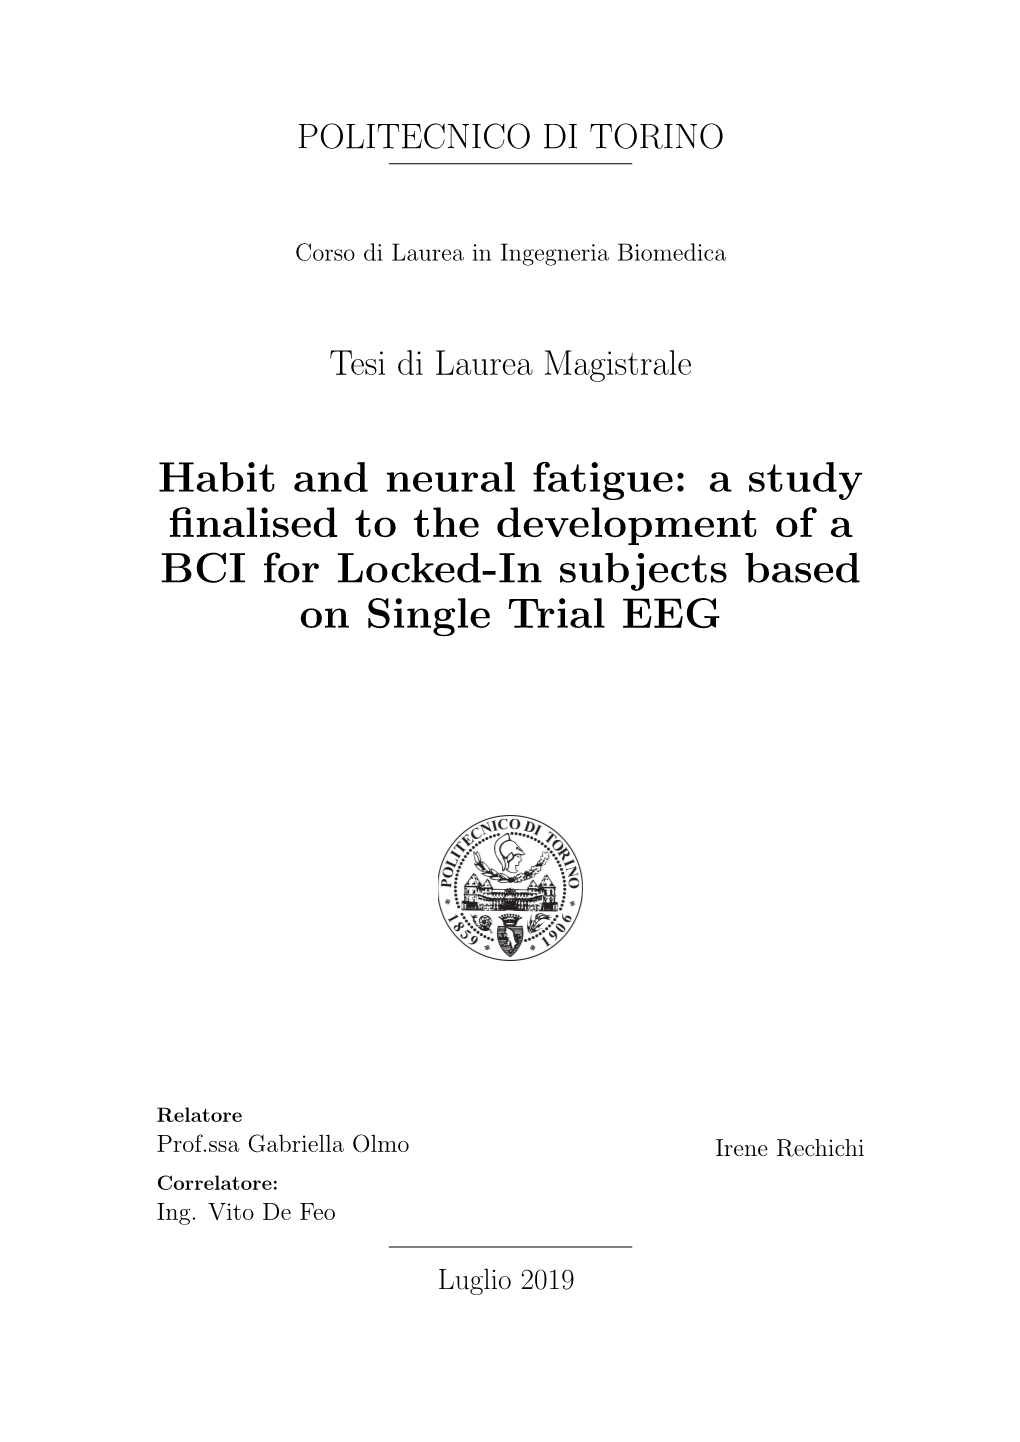 A Study Finalised to the Development of a BCI for Locked-In Subjects Based on Single Trial